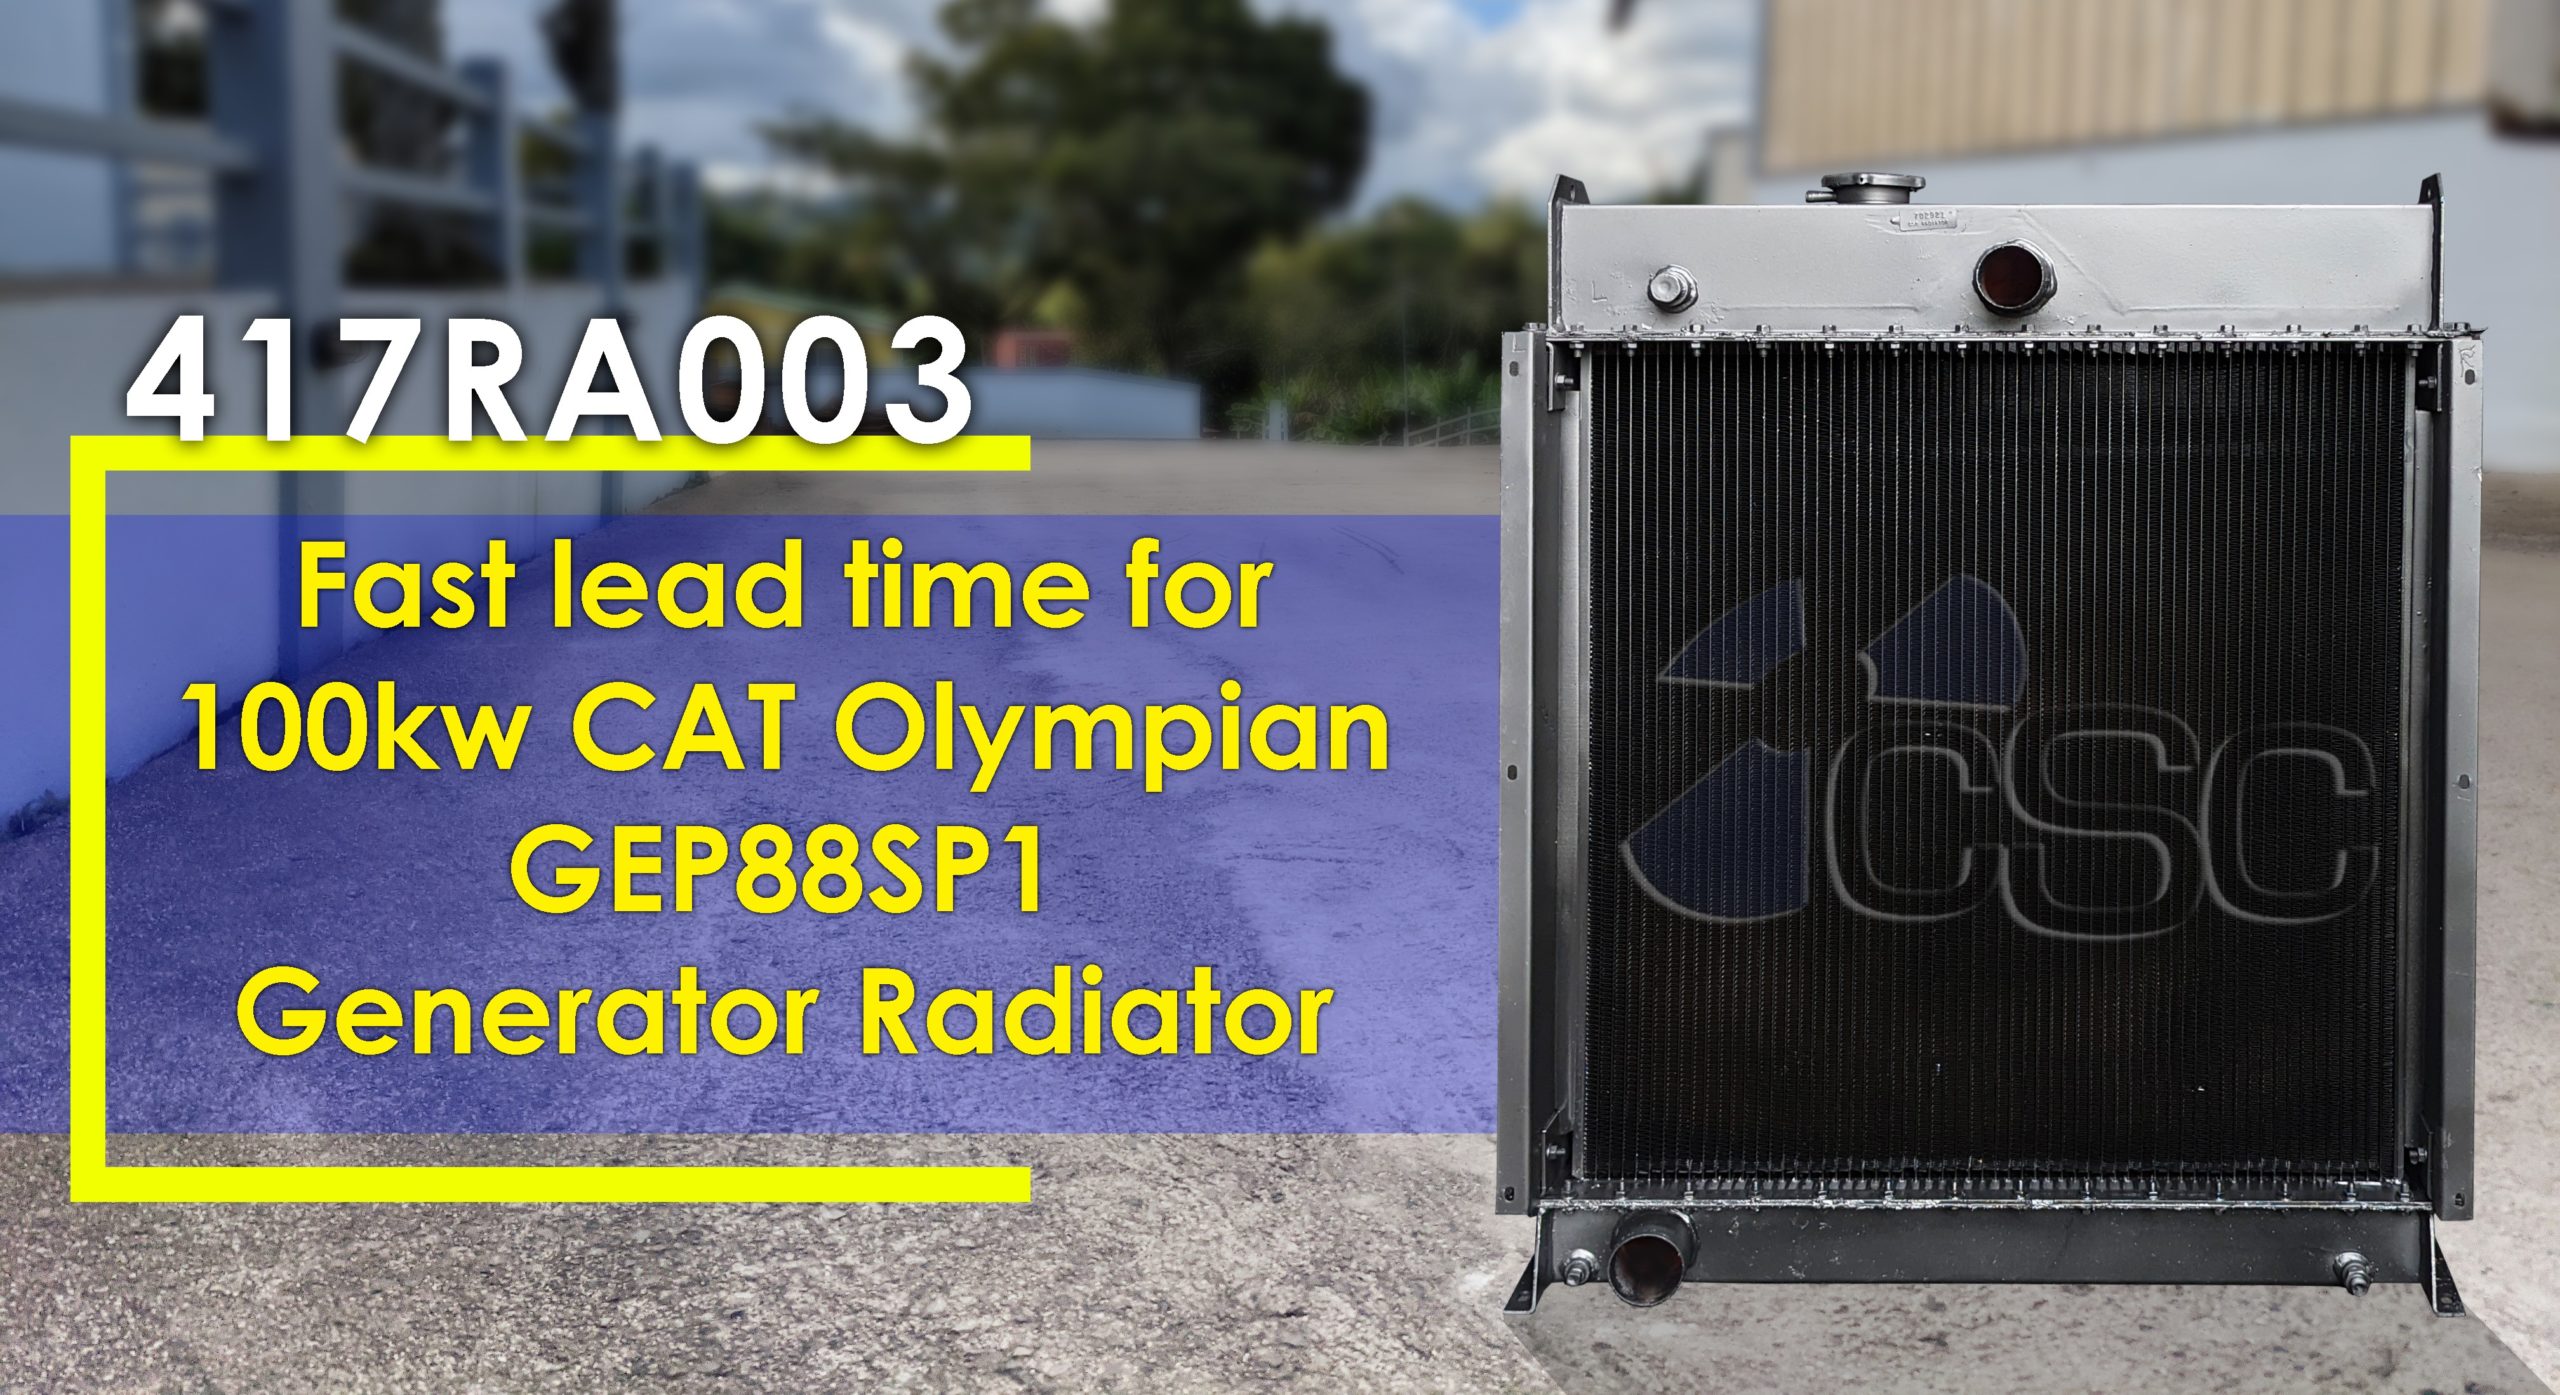 Fast lead time for 100kw CAT Olympian GEP88SP1 Generator Radiator (417RA003)